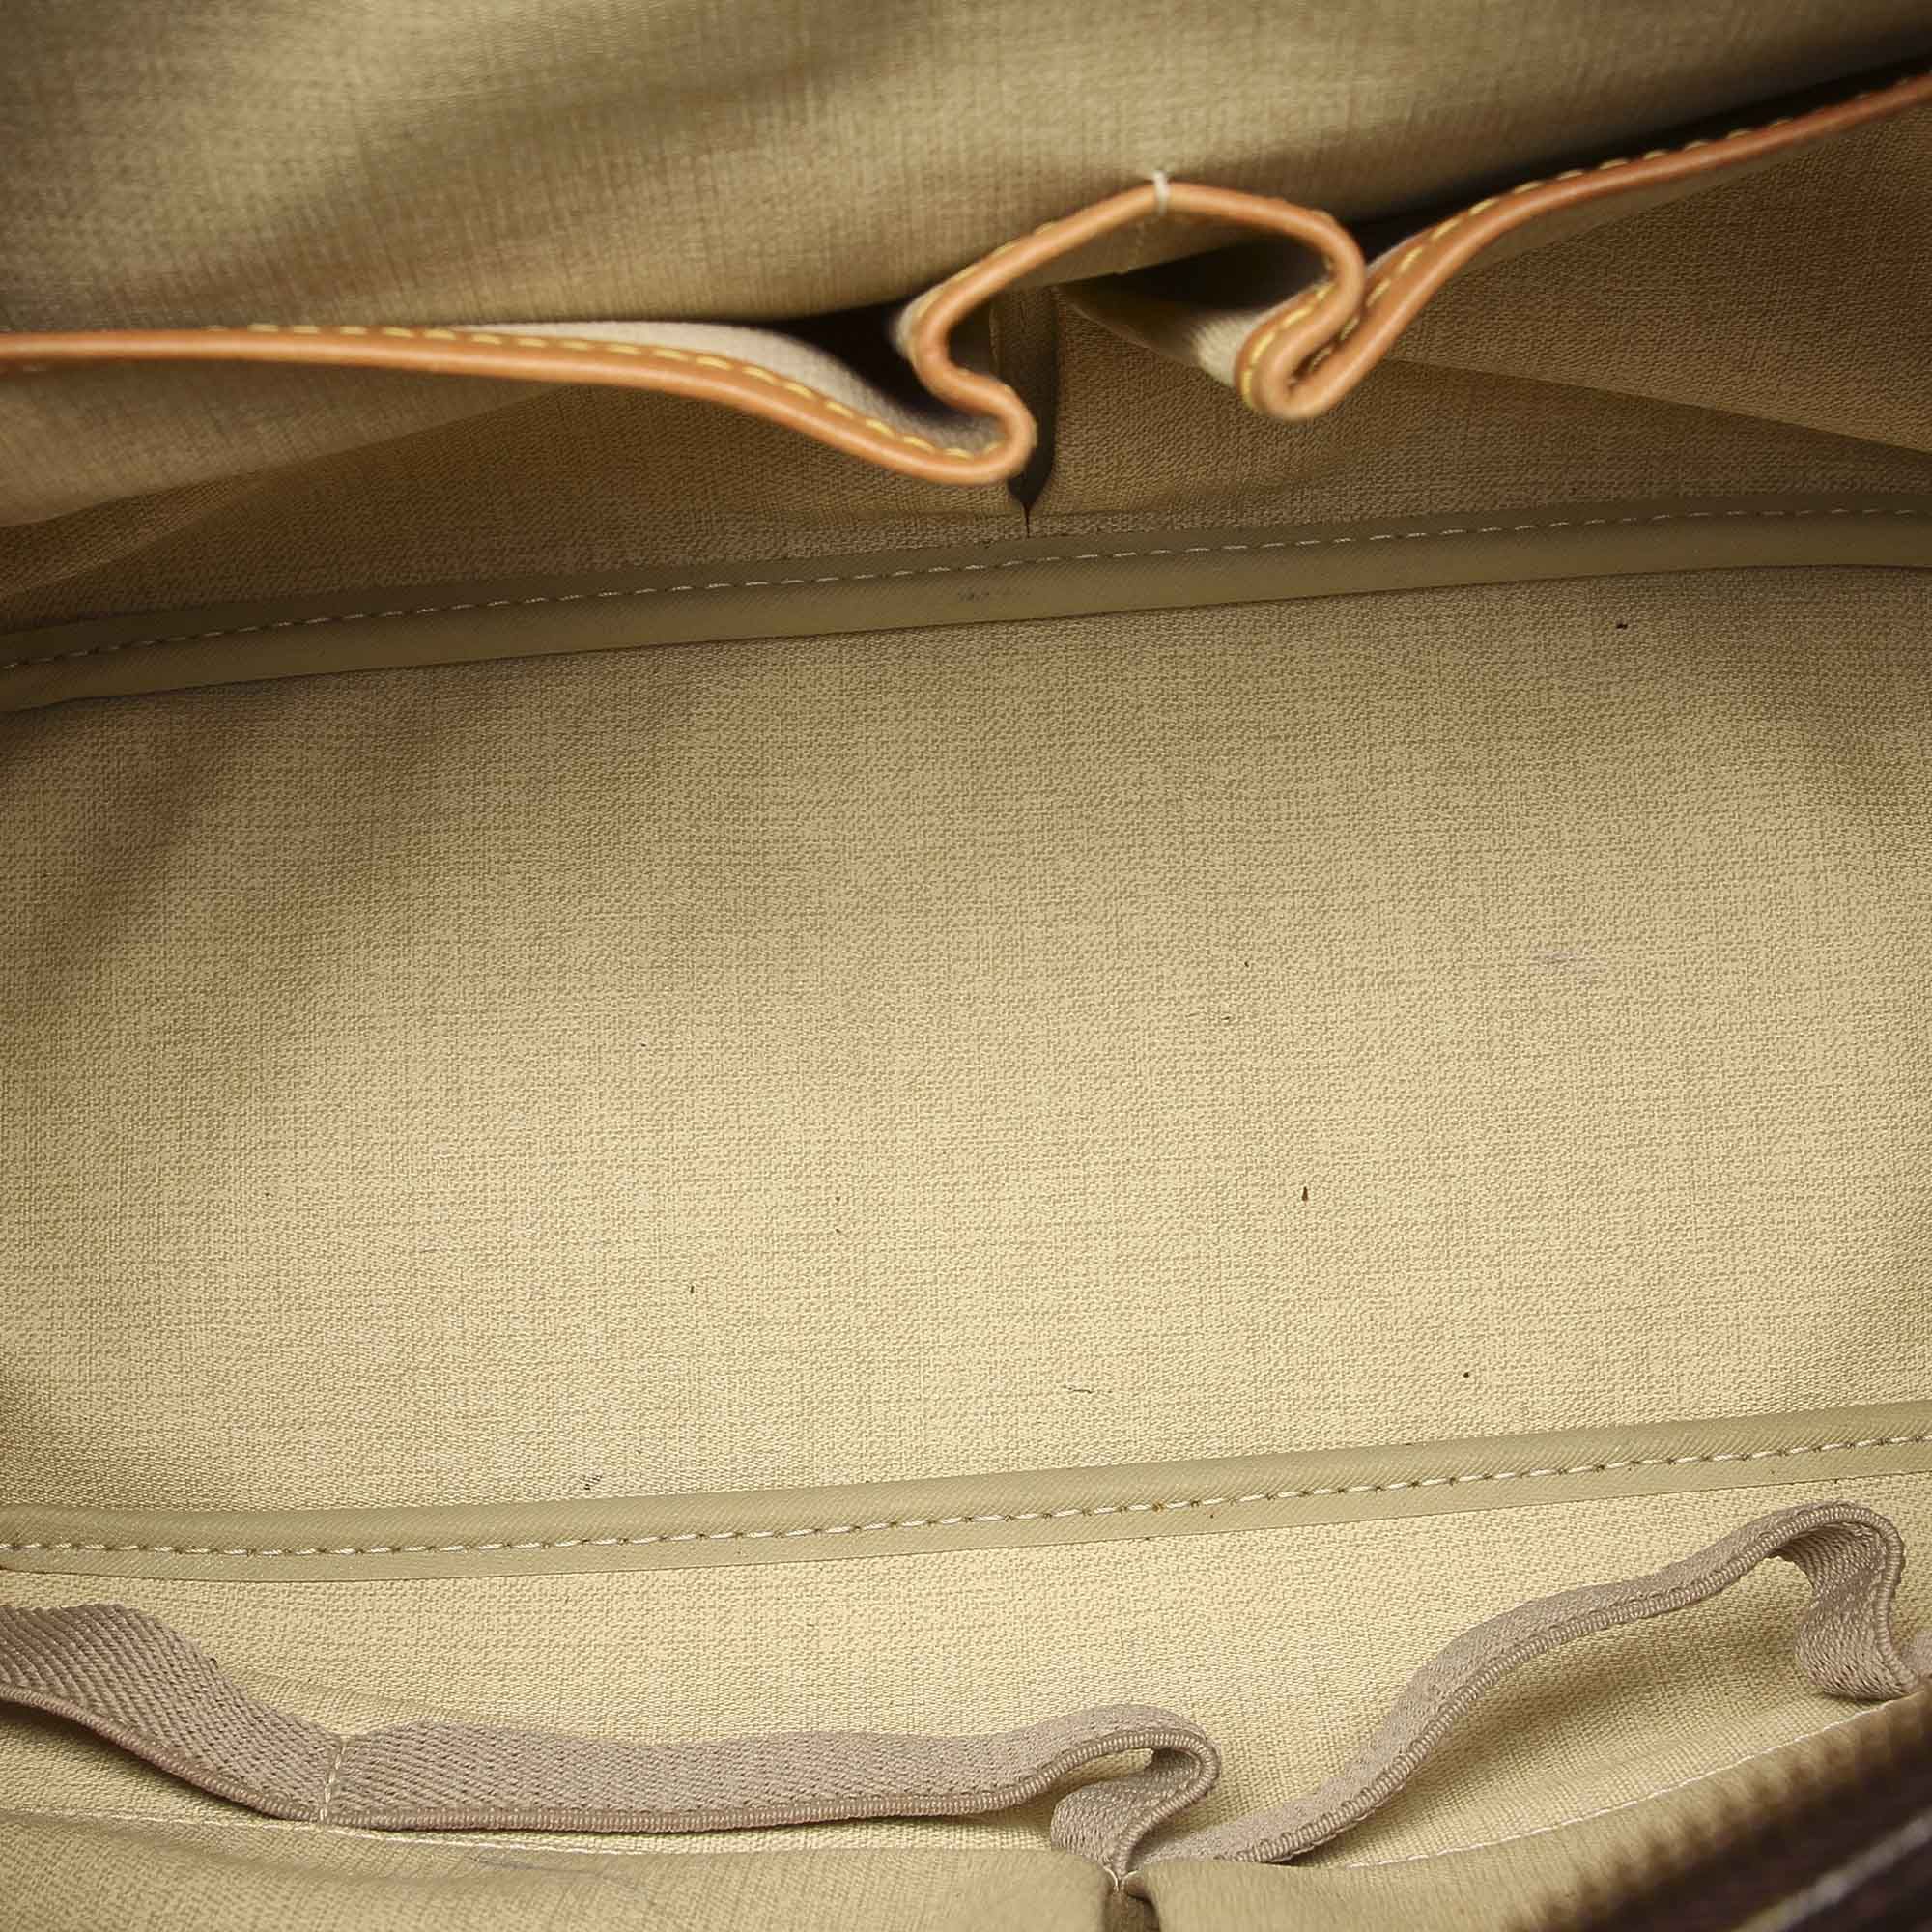 VINTAGE. RRP AS NEW. The Deauville features a monogram canvas body, an exterior front slip pocket, rolled leather handles, a top zip closure, and an interior open pockets.Exterior back is discolored, scratched and stained. Exterior bottom is discolored. Exterior corners is discolored. Exterior front is discolored, scratched and stained. Exterior handle is discolored. Exterior side is discolored. Buckle is scratched and tarnished. Zipper is scratched and tarnished.

Dimensions:
Length 24cm
Width 33cm
Depth 12.5cm
Hand Drop 10cm
Shoulder Drop 10cm

Original Accessories: Name Tag

Serial Number: VI1928
Color: Brown
Material: Canvas x Monogram Canvas x Leather x Vachetta Leather
Country of Origin: France
Boutique Reference: SSU92958K1407


Product Rating: GoodCondition

To help provide you with a wider range of products, this item will be shipped to you from an international warehouse. This means that the delivery may take a little bit longer than usual. Tracking details will be provided for you inside your dispatch email and in your account